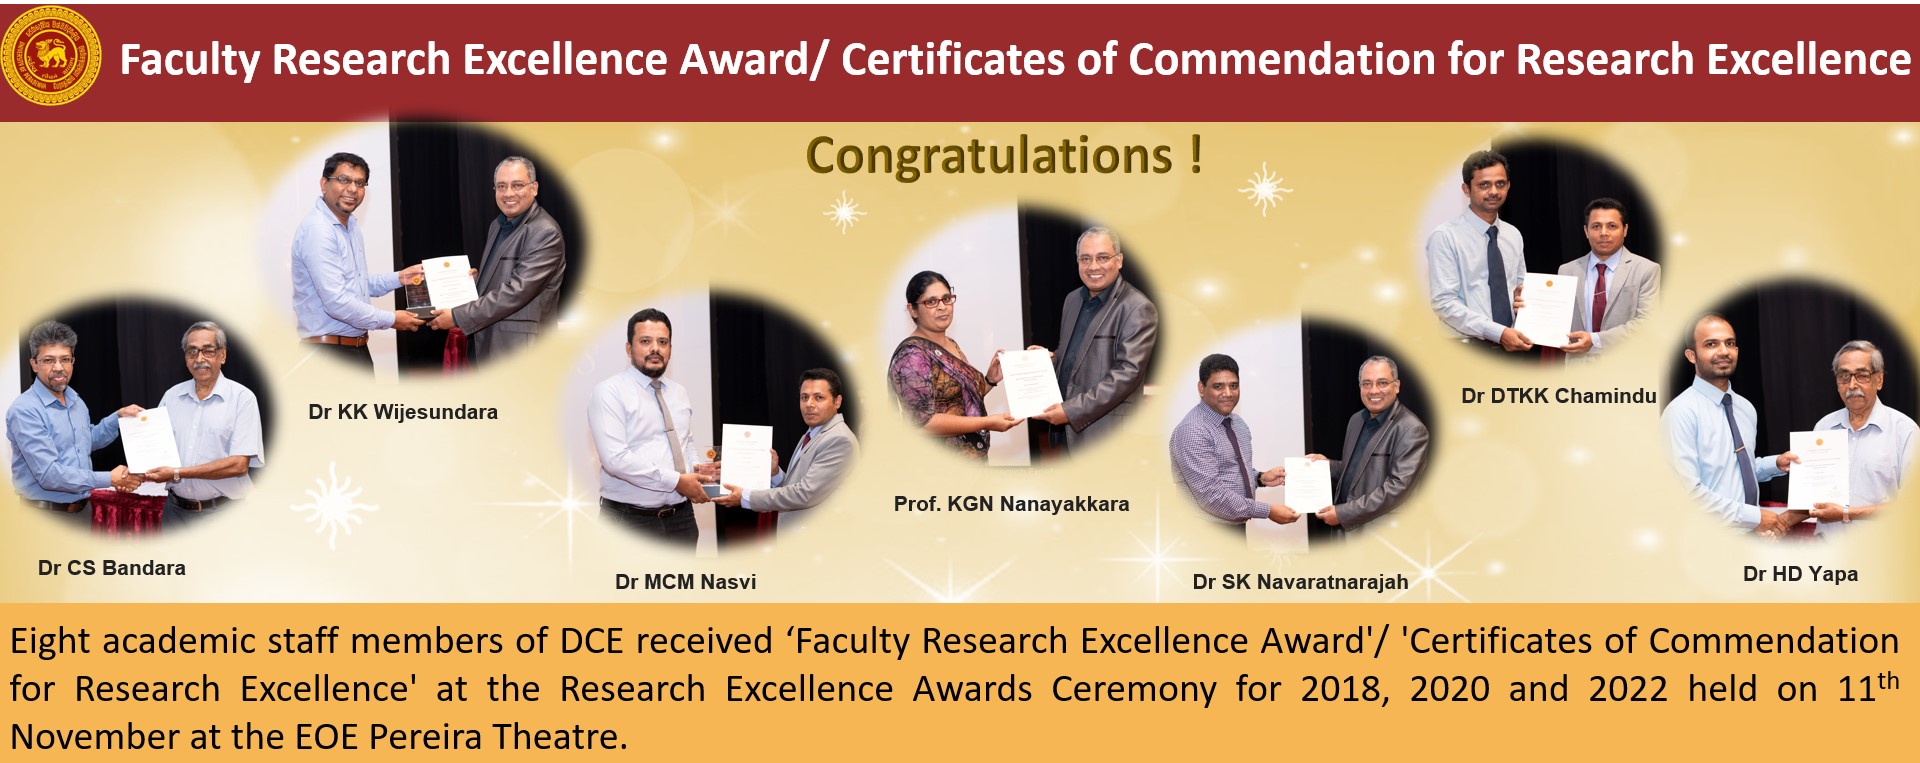 Faculty Research Excellence Awards - 2018, 2020, 2022 